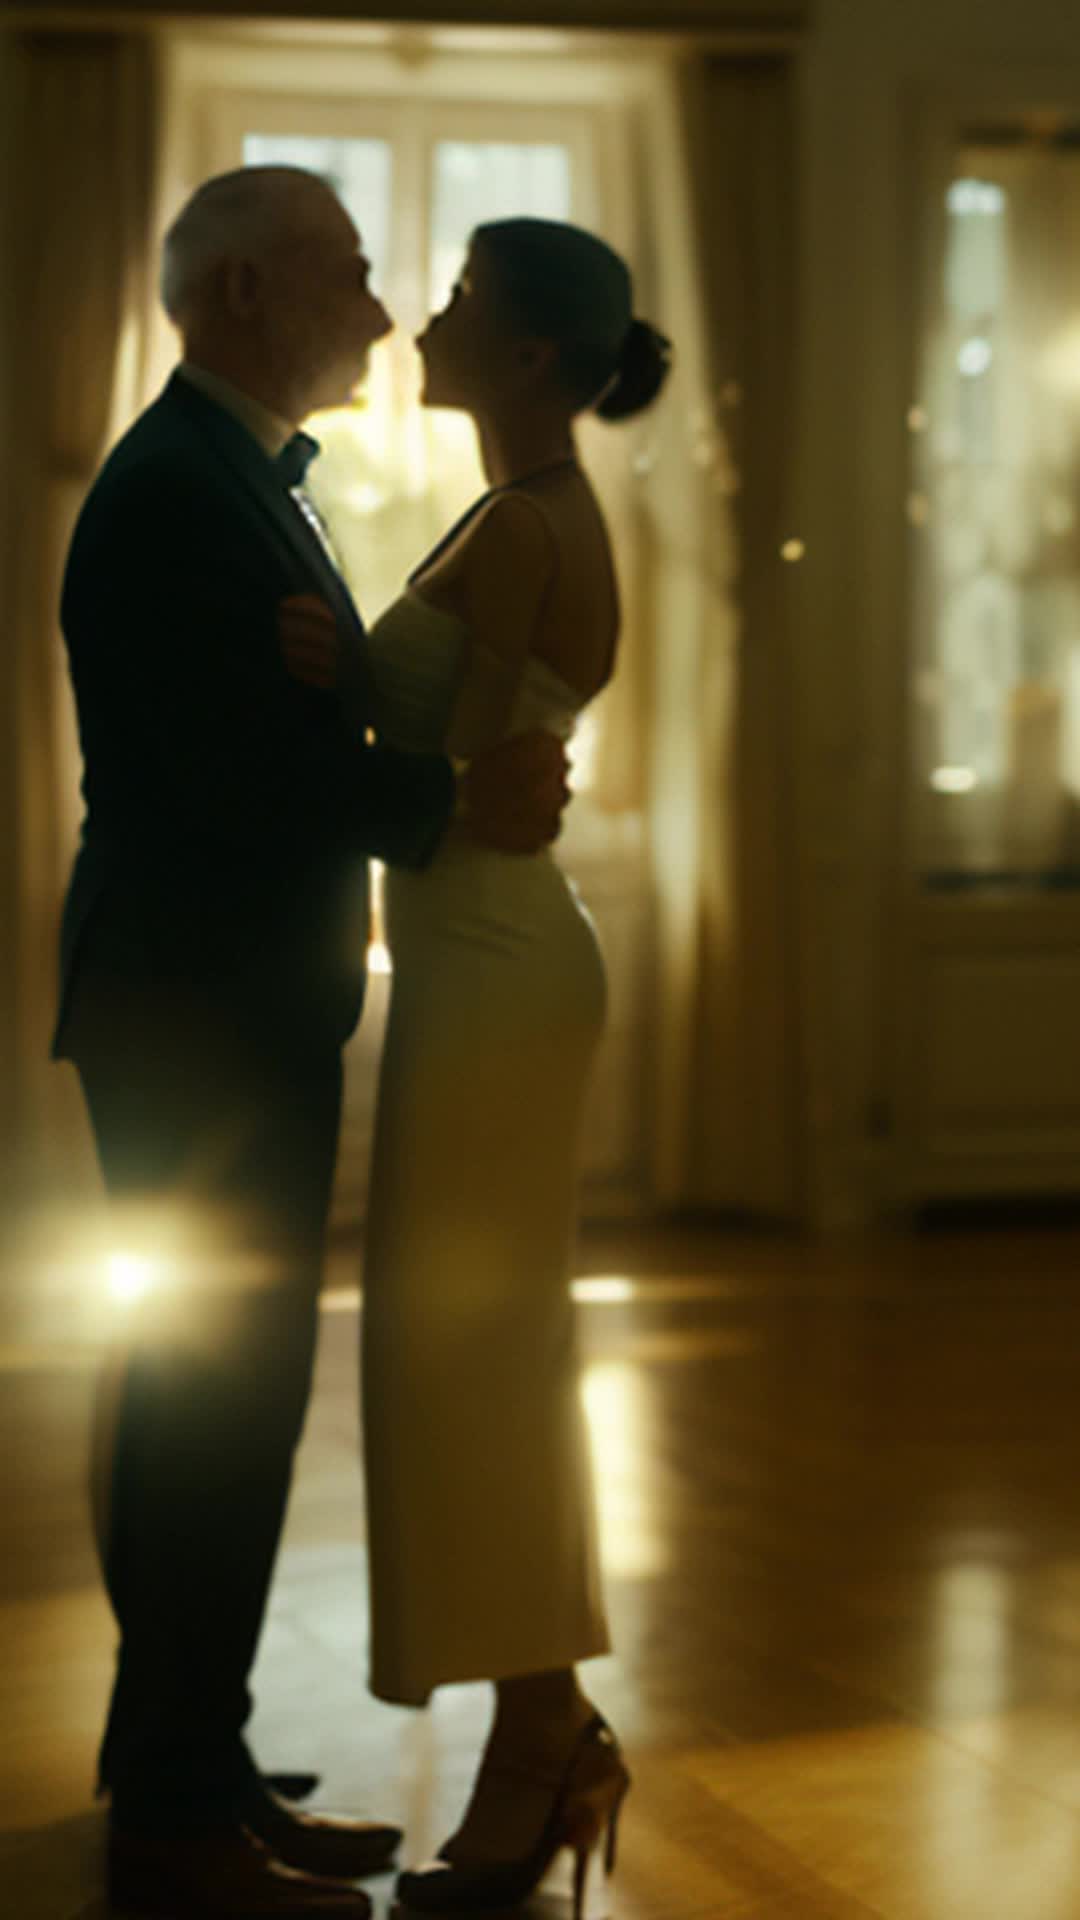 Couple dancing in spacious empty room, elegant and graceful, camera zooms out revealing they are inside a diamond, held by elderly man next to his wife, soft shadows, warm lighting, raw footage feel, as zoom continues couple realizes they are seeing themselves from the past within the diamond, nostalgic atmosphere, detailed and sharp, cinematic effect, smooth transitions, intimate and emotional, subtle ambient music